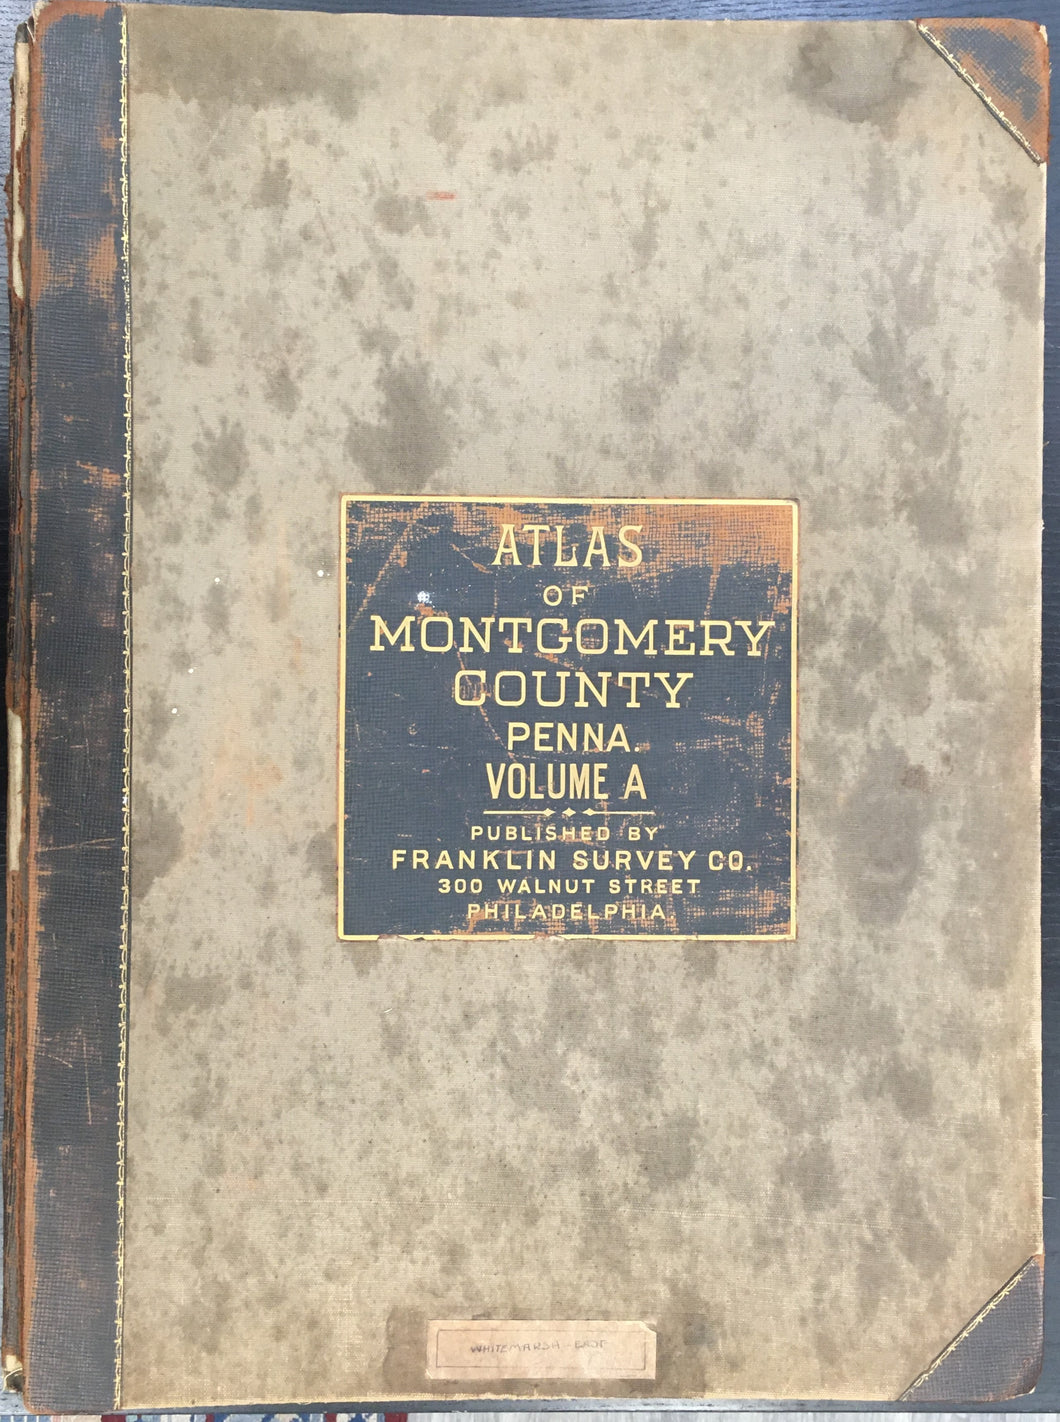 Franklin Survey Co.  “Property Atlas of Montgomery County, Pennsylvania Volume A.” [Townships of Lower and Upper Moreland, Horsham, Montgomery, Lower and Upper Gwynedd, Bryn Athyn, Hatboro and North Wales].  1934